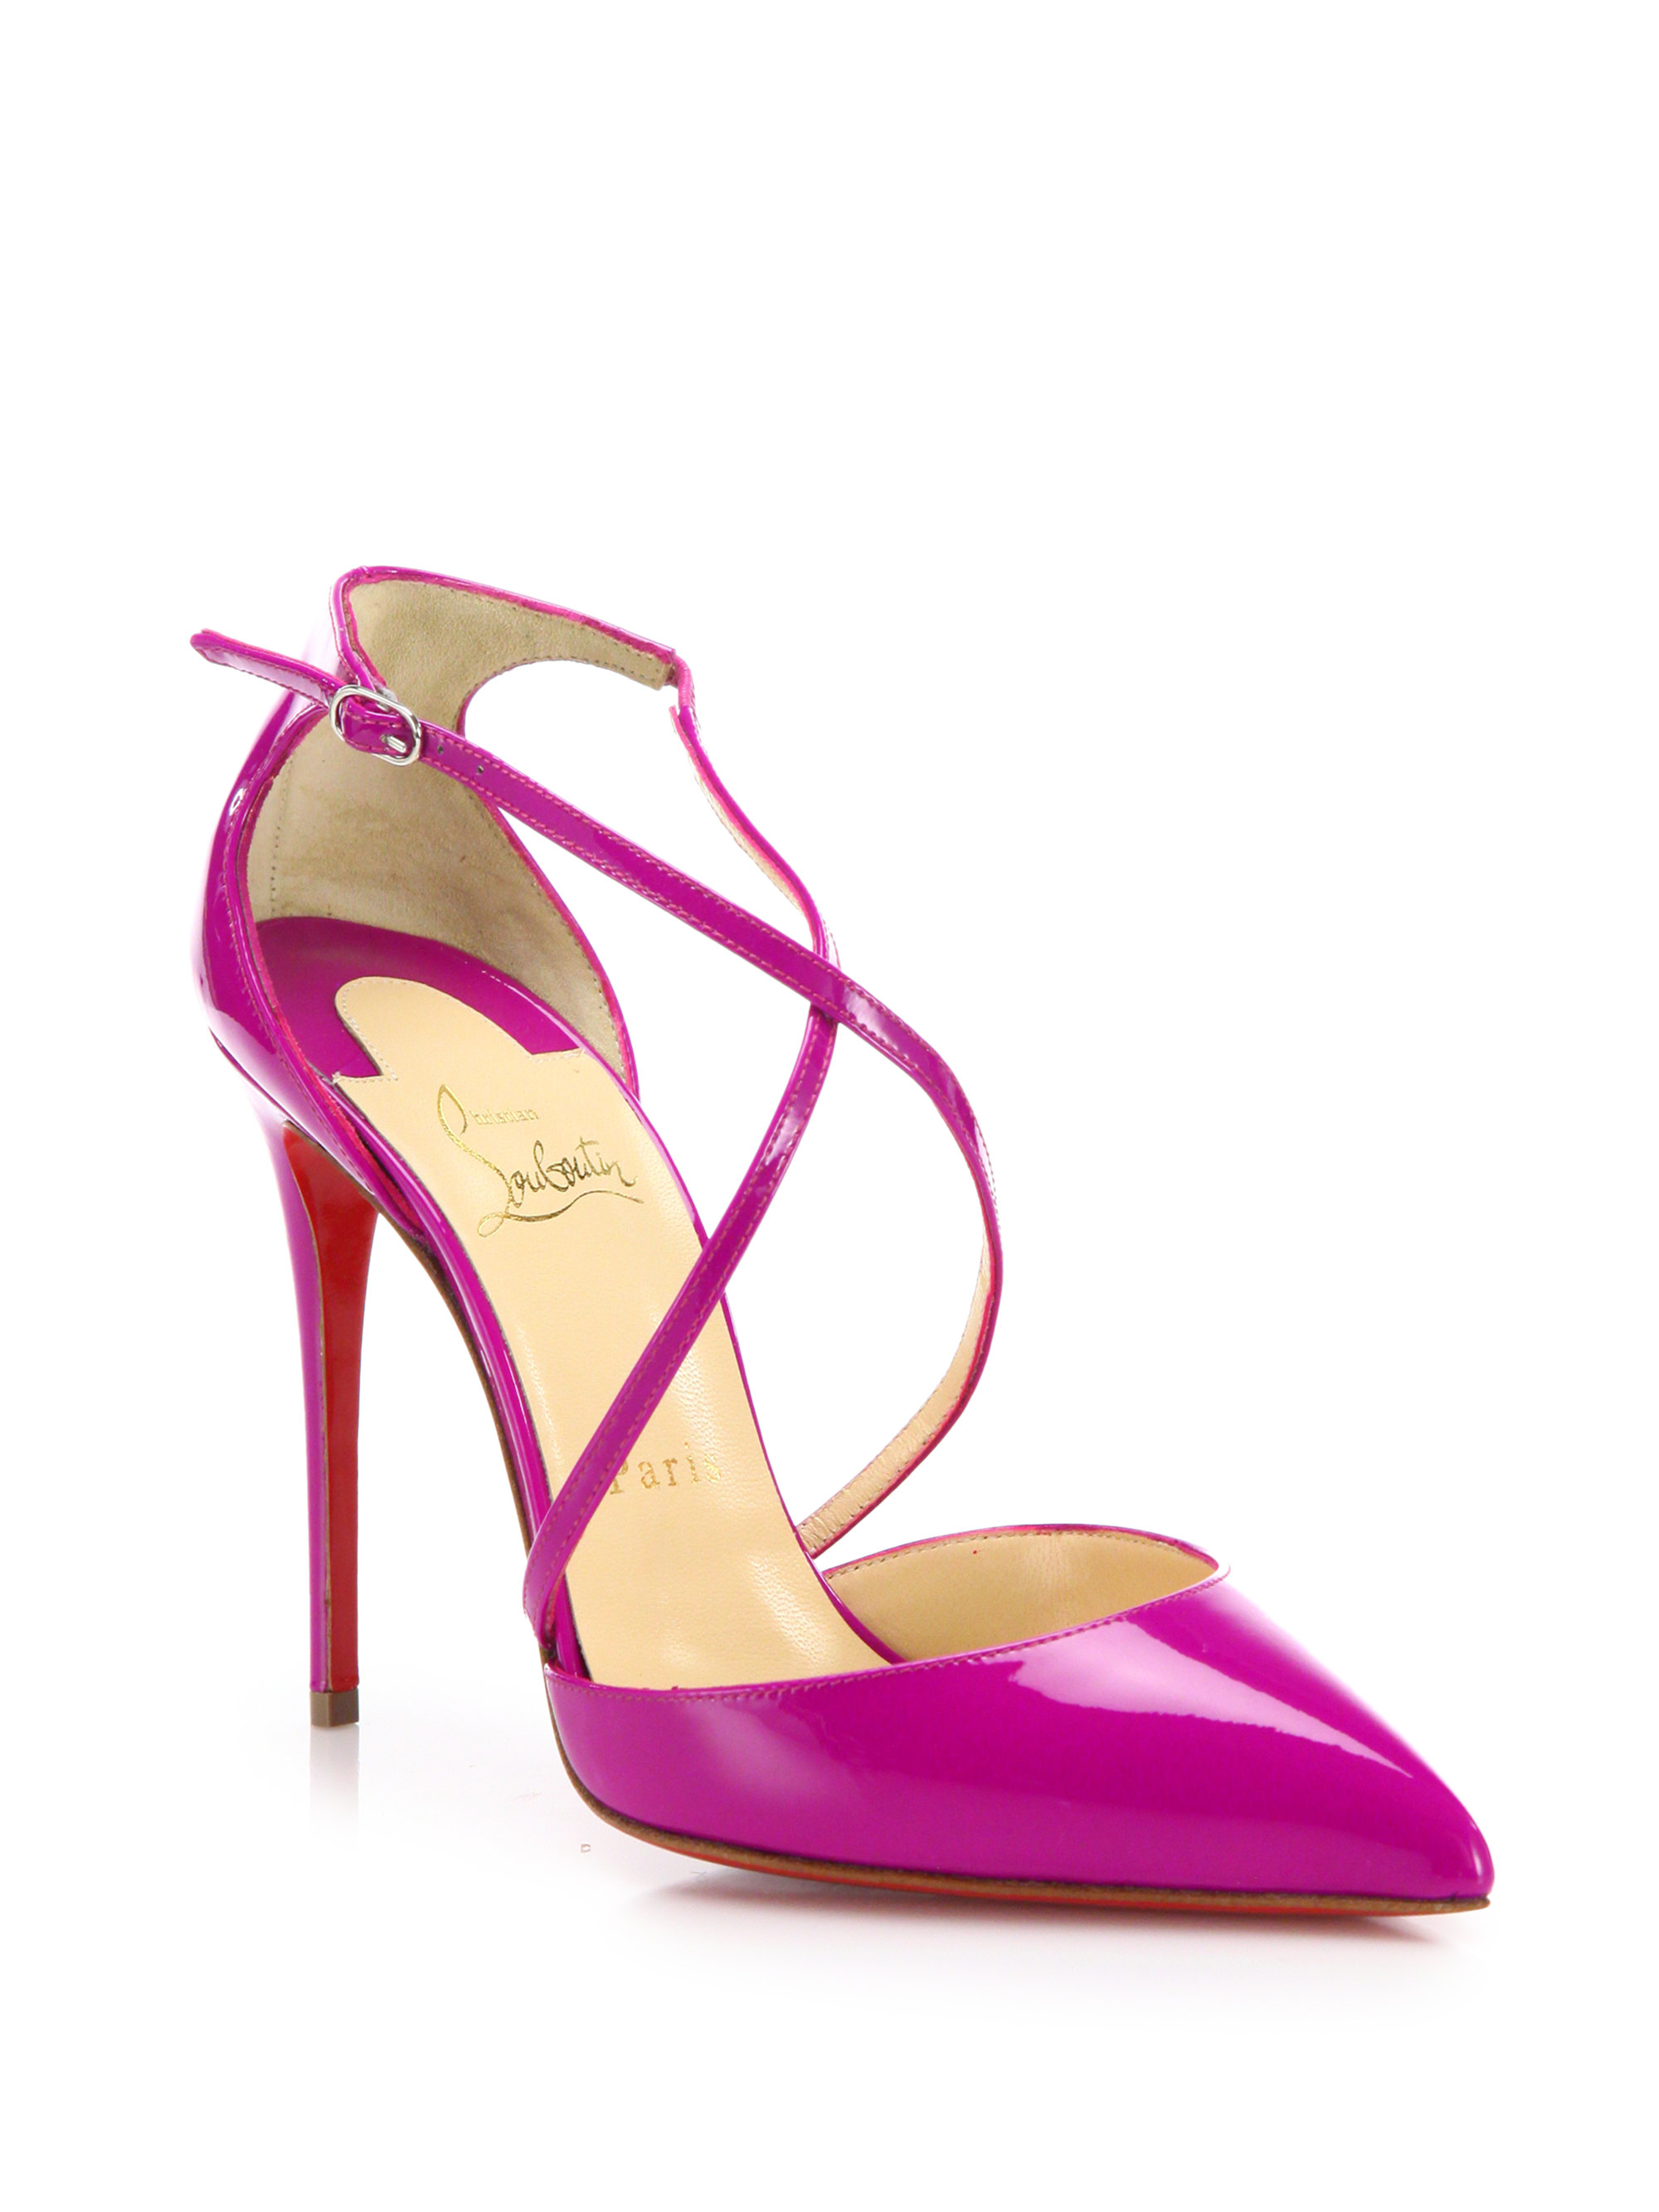 christian louboutin pink patent leather sandals  